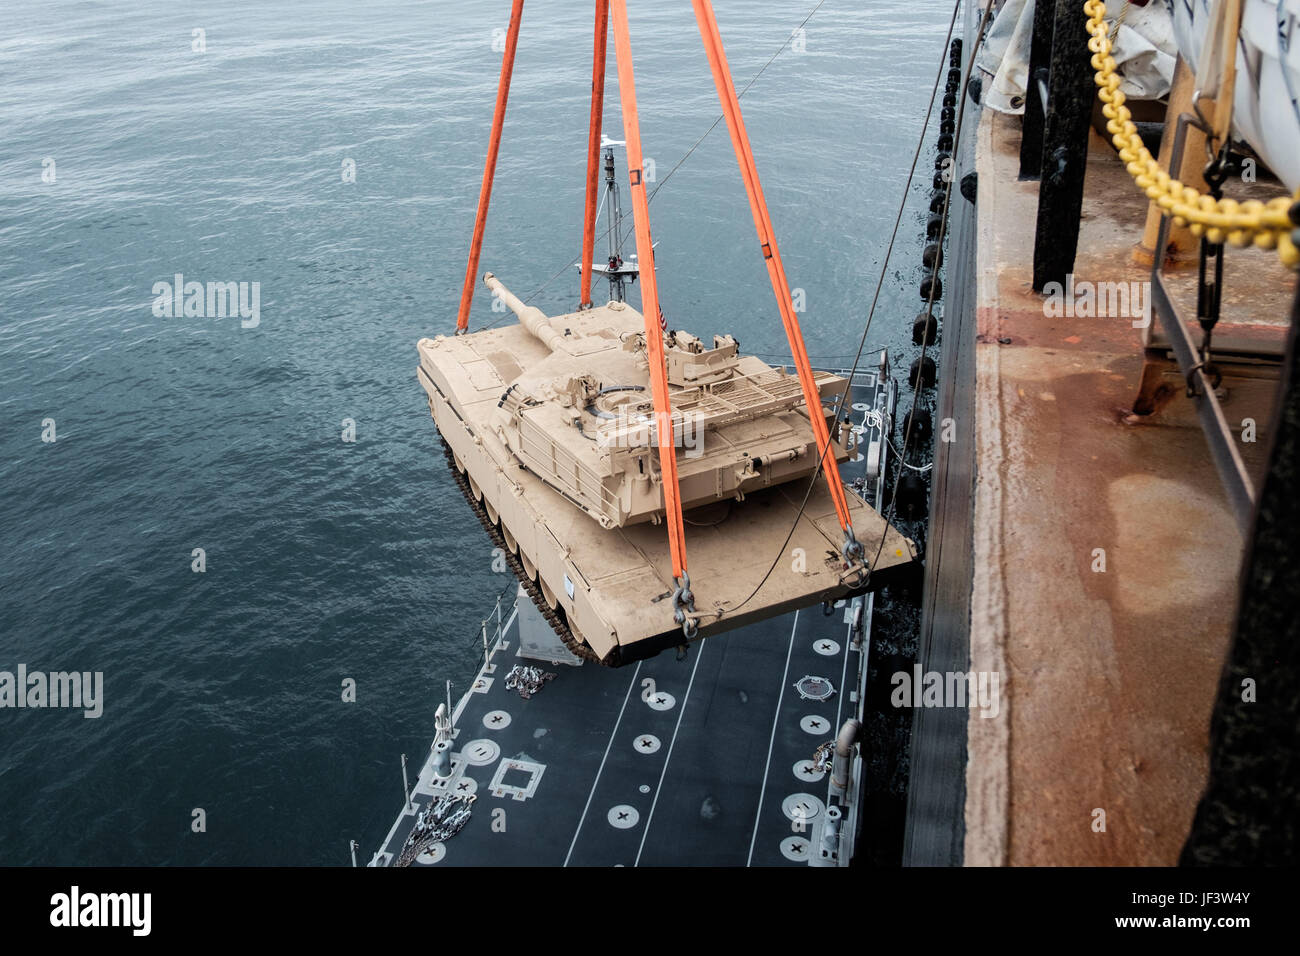 170523-N-YG116-008 BALTIC SEA (May 23, 2017) An M1A1 Abrams tank is lowered off the USNS SGT William R. Button and onto an Improvised Naval Literage System Causeway ferry, bound for the beach to participate in Operation Saber Strike 2017. Button, a Military Sealift Command Maritime Prepositioning Force Container, delivered mission-critical equipment belonging to Marine Corps Combat Logistics Regiment 45, 4th Marine Logistics Group, to the Port of Ventspils, Latvia. Saber Strike is a long-standing U.S. Army Europe-led cooperative training exercise designed to improve joint interoperability thro Stock Photo